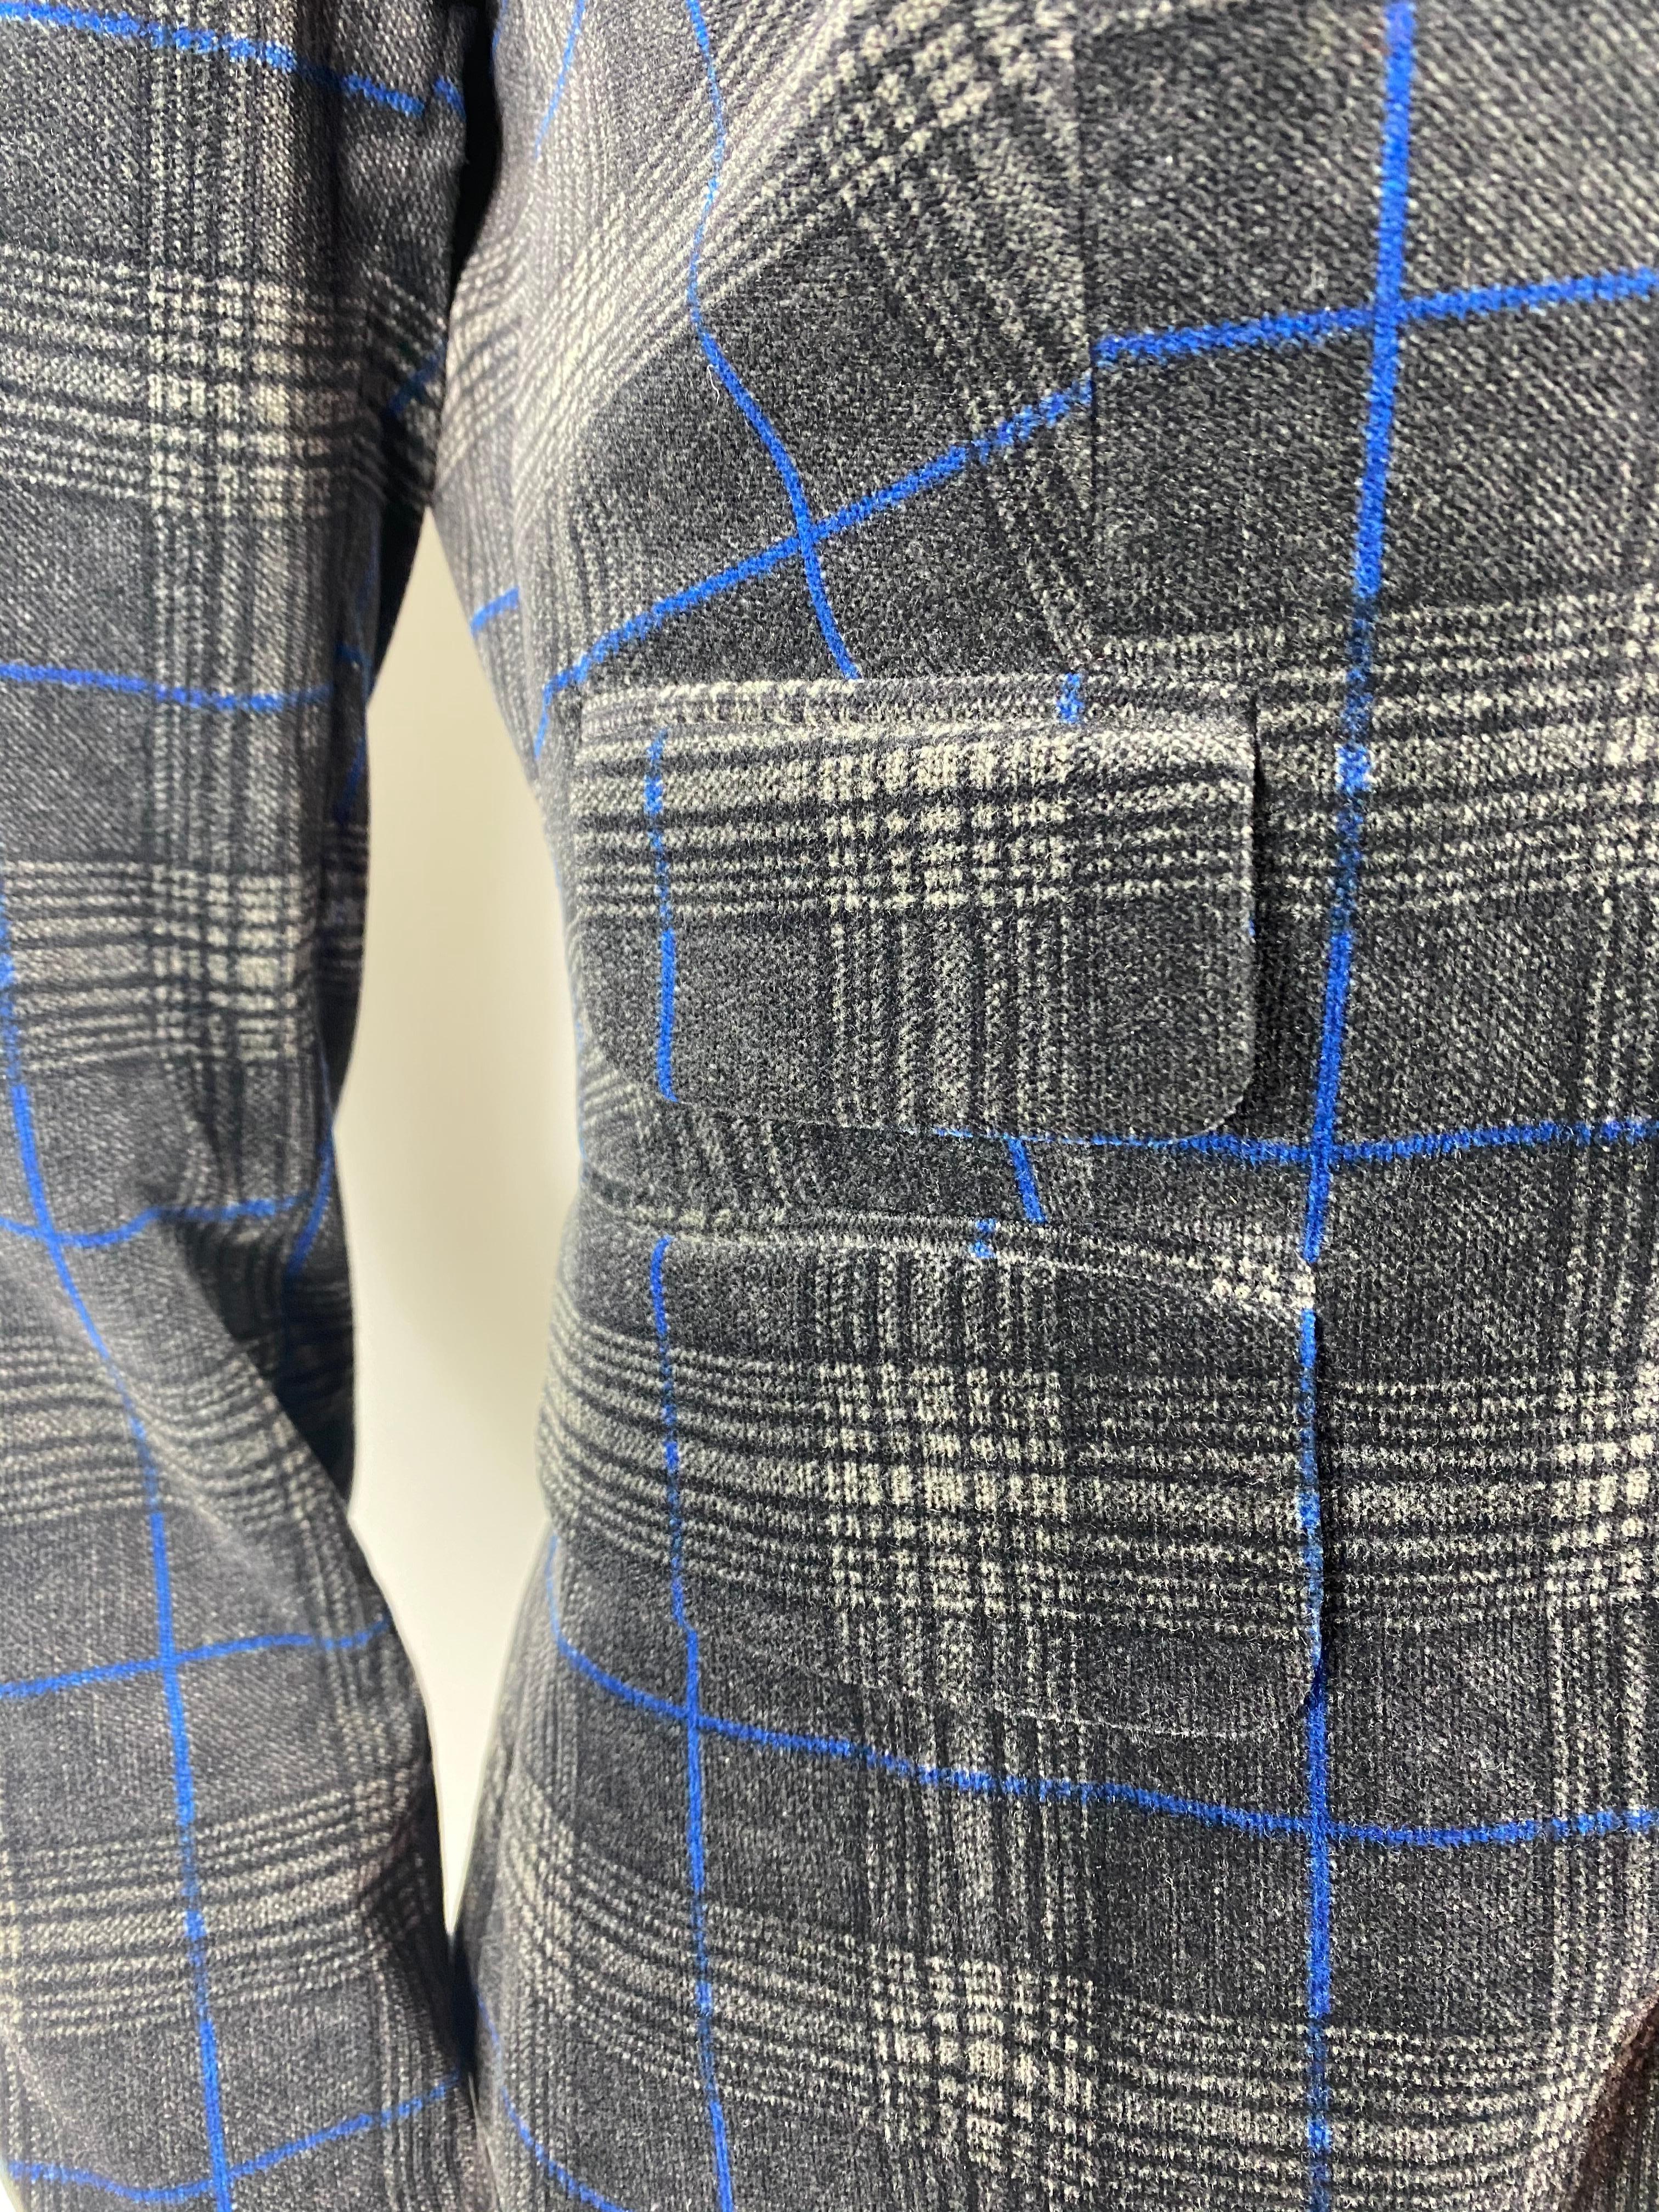 Product details:

Featuring grey and blue check and plaid pattern in velvet finish with collar, front button closure and front pockets design detail. Made in Italy.